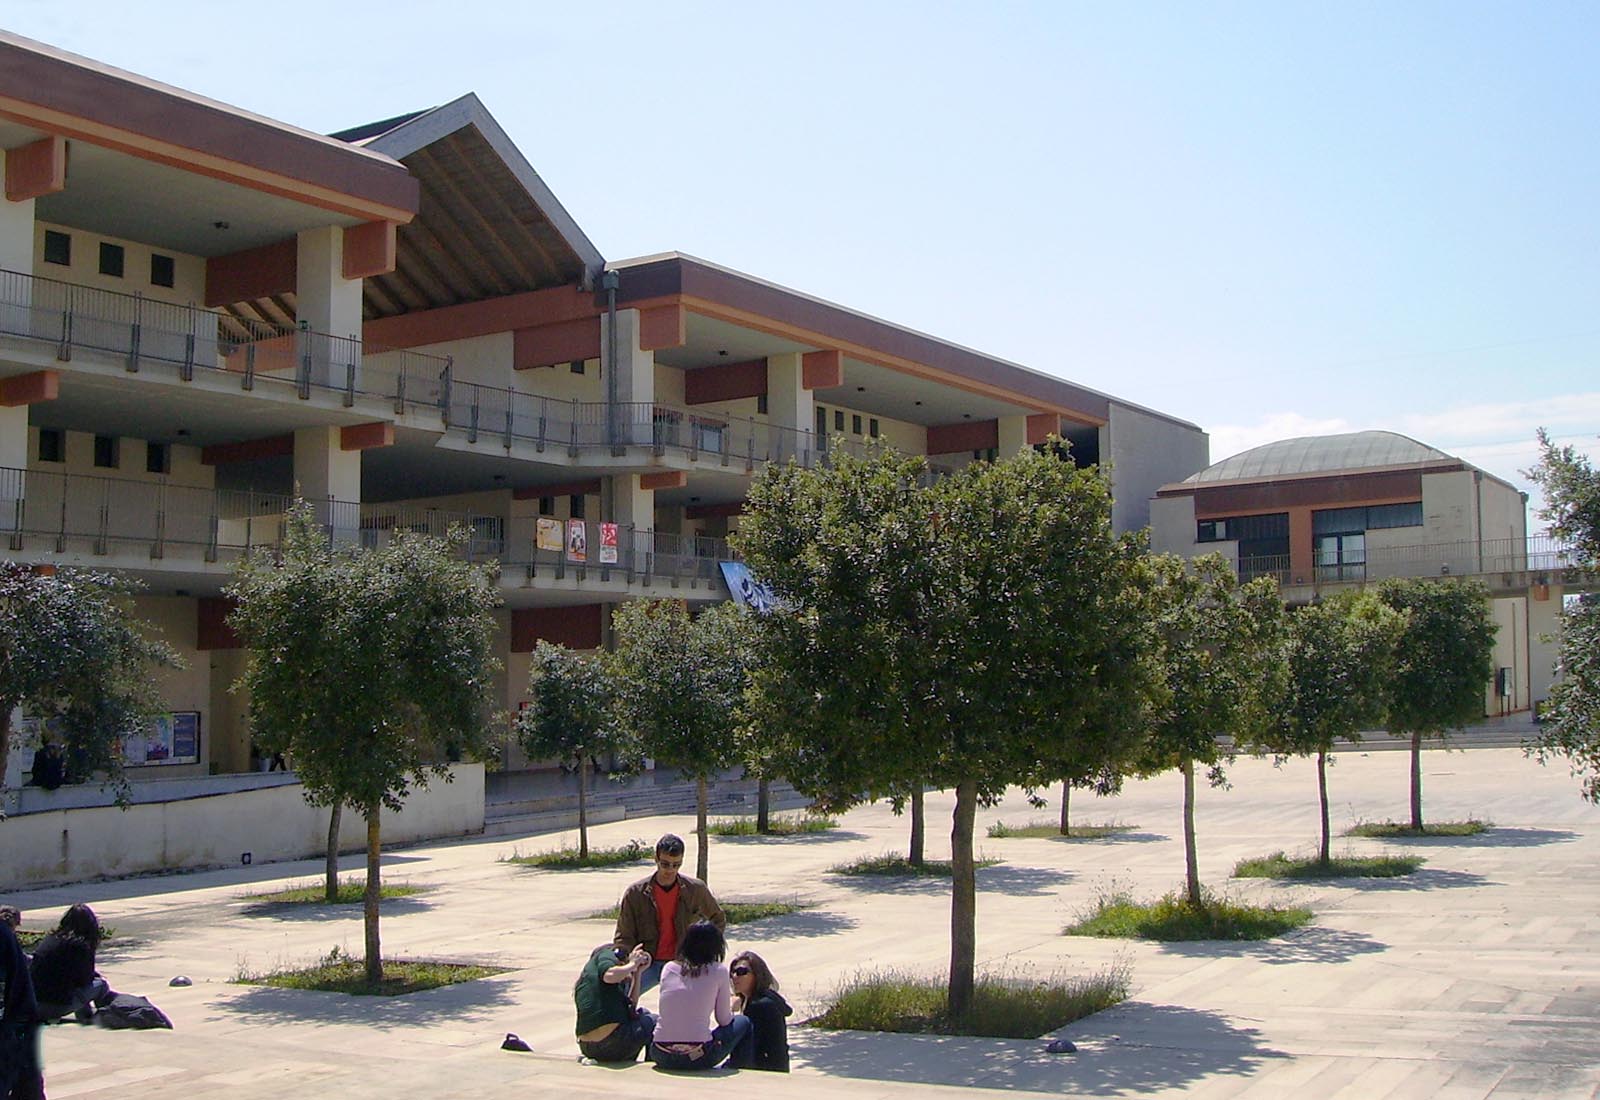 Ecotekne university center in Lecce - The internal court of the classrooms building